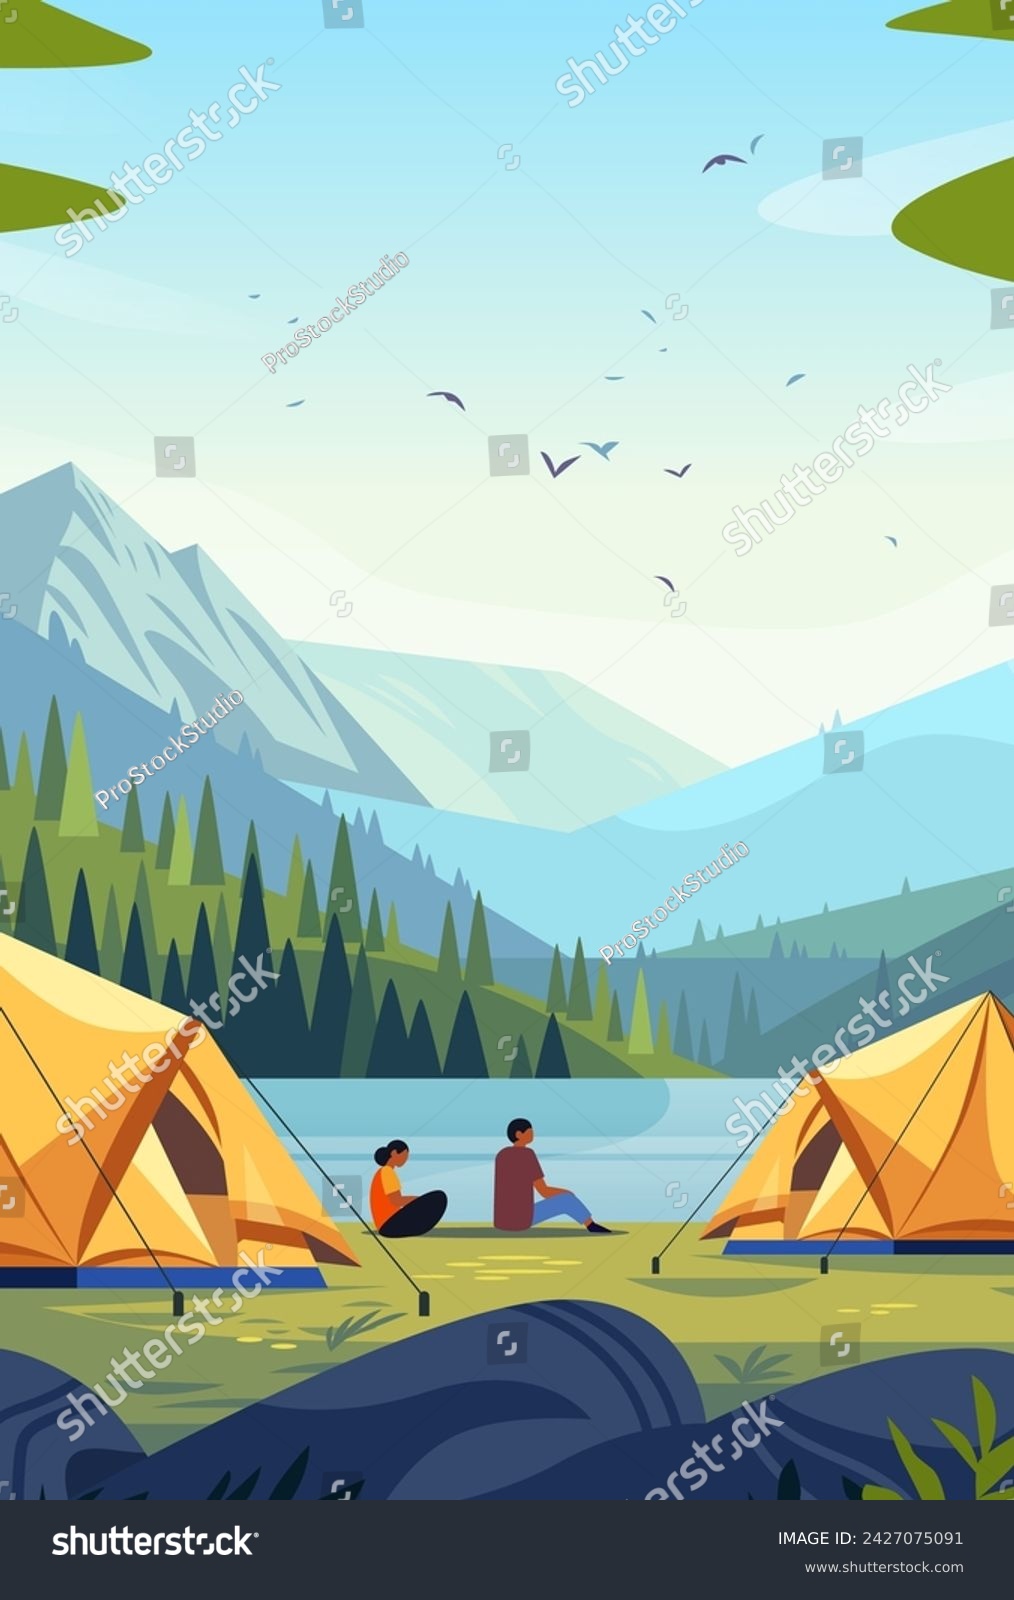 SVG of tent camp with campers sitting at river bank tourists couple resting outdoors summer landscape with people at campsite vertical svg